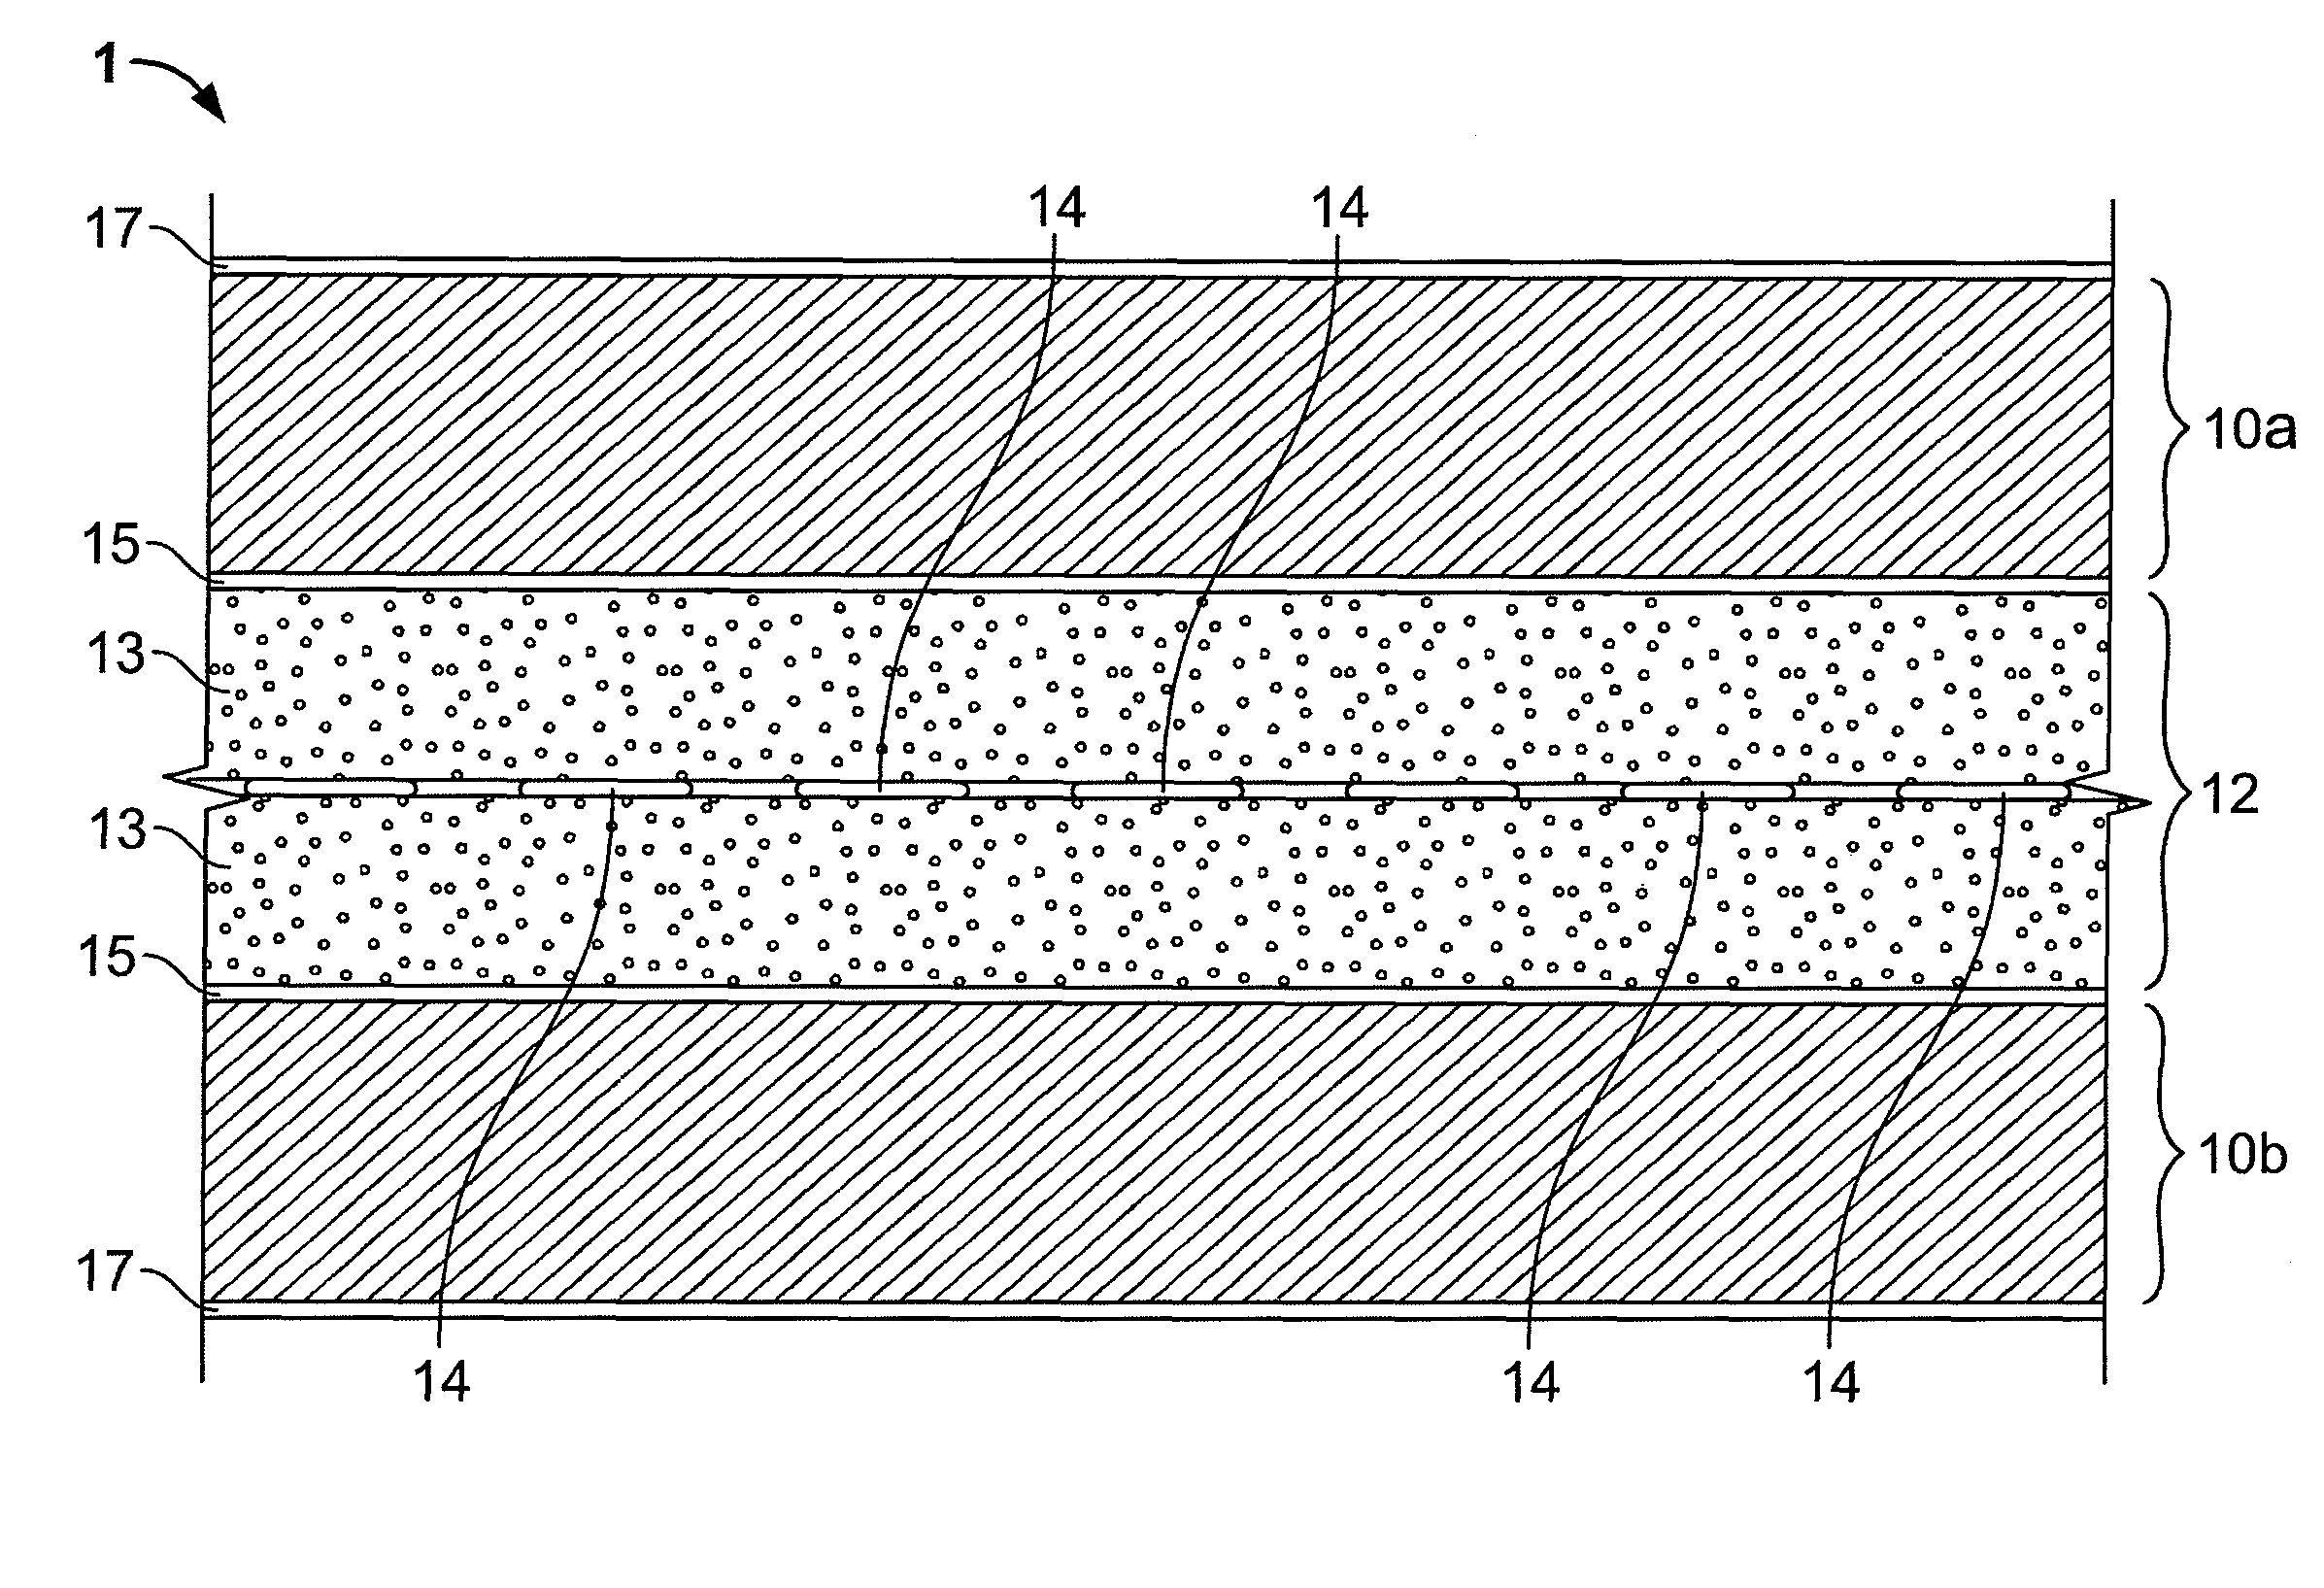 Insulated composite body panel structure for a refrigerated truck body